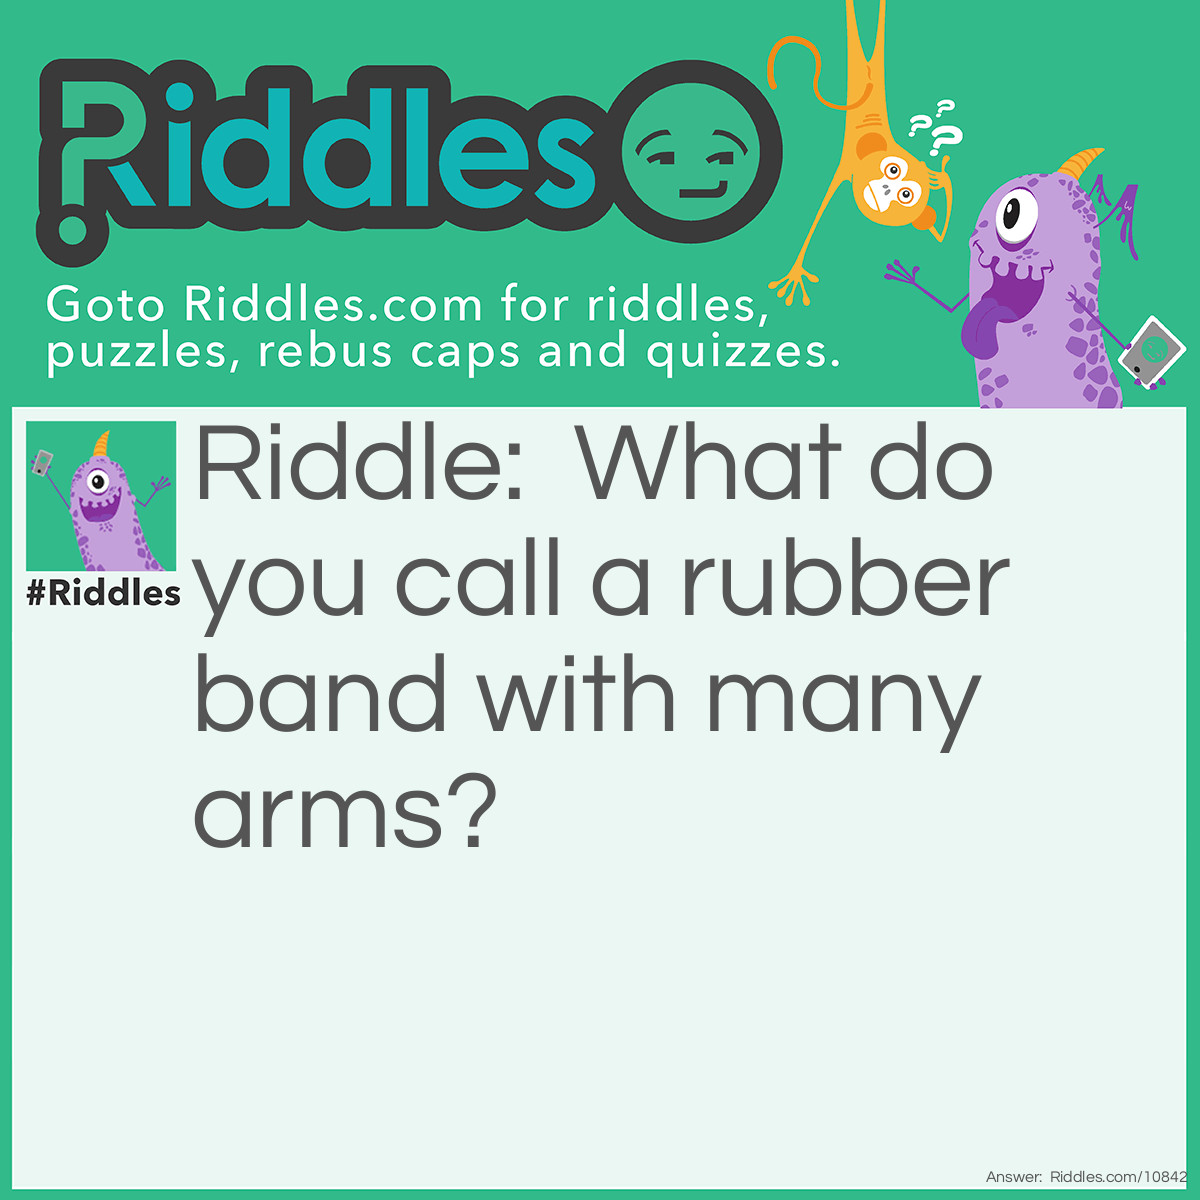 Riddle: What do you call a rubber band with many arms? Answer: An armed robber.